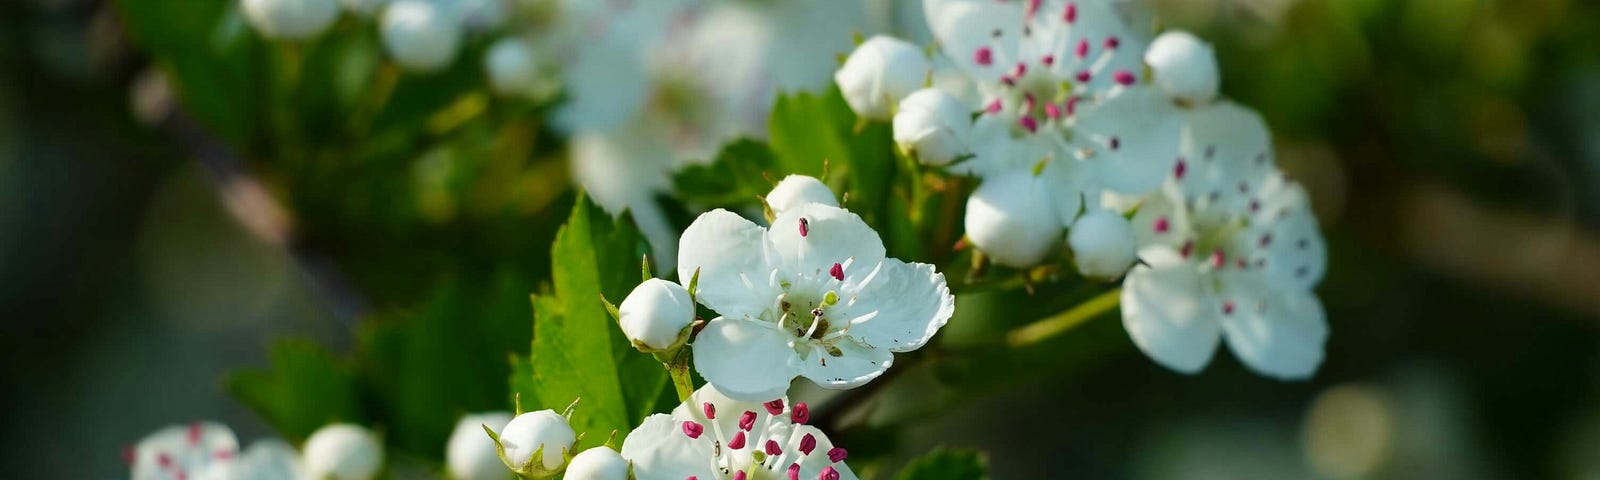 White scented flowers of the hawthorn tree in bloom.